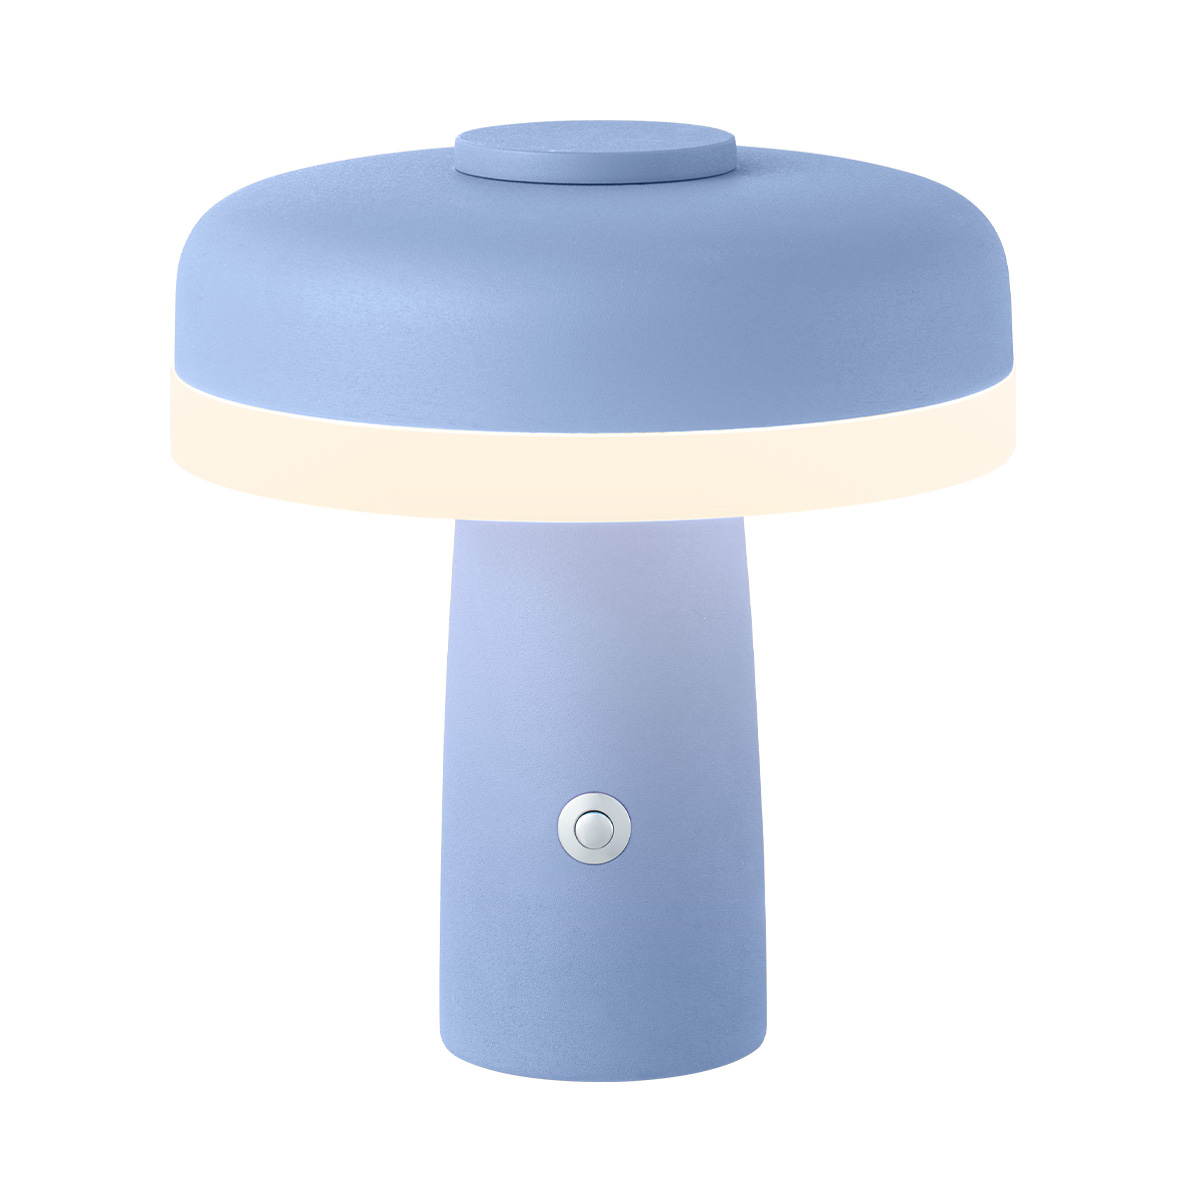 Tangla lighting - TLT7499-01ST - LED Table lamp - rechargeable metal and glass - light blue - rechargeable